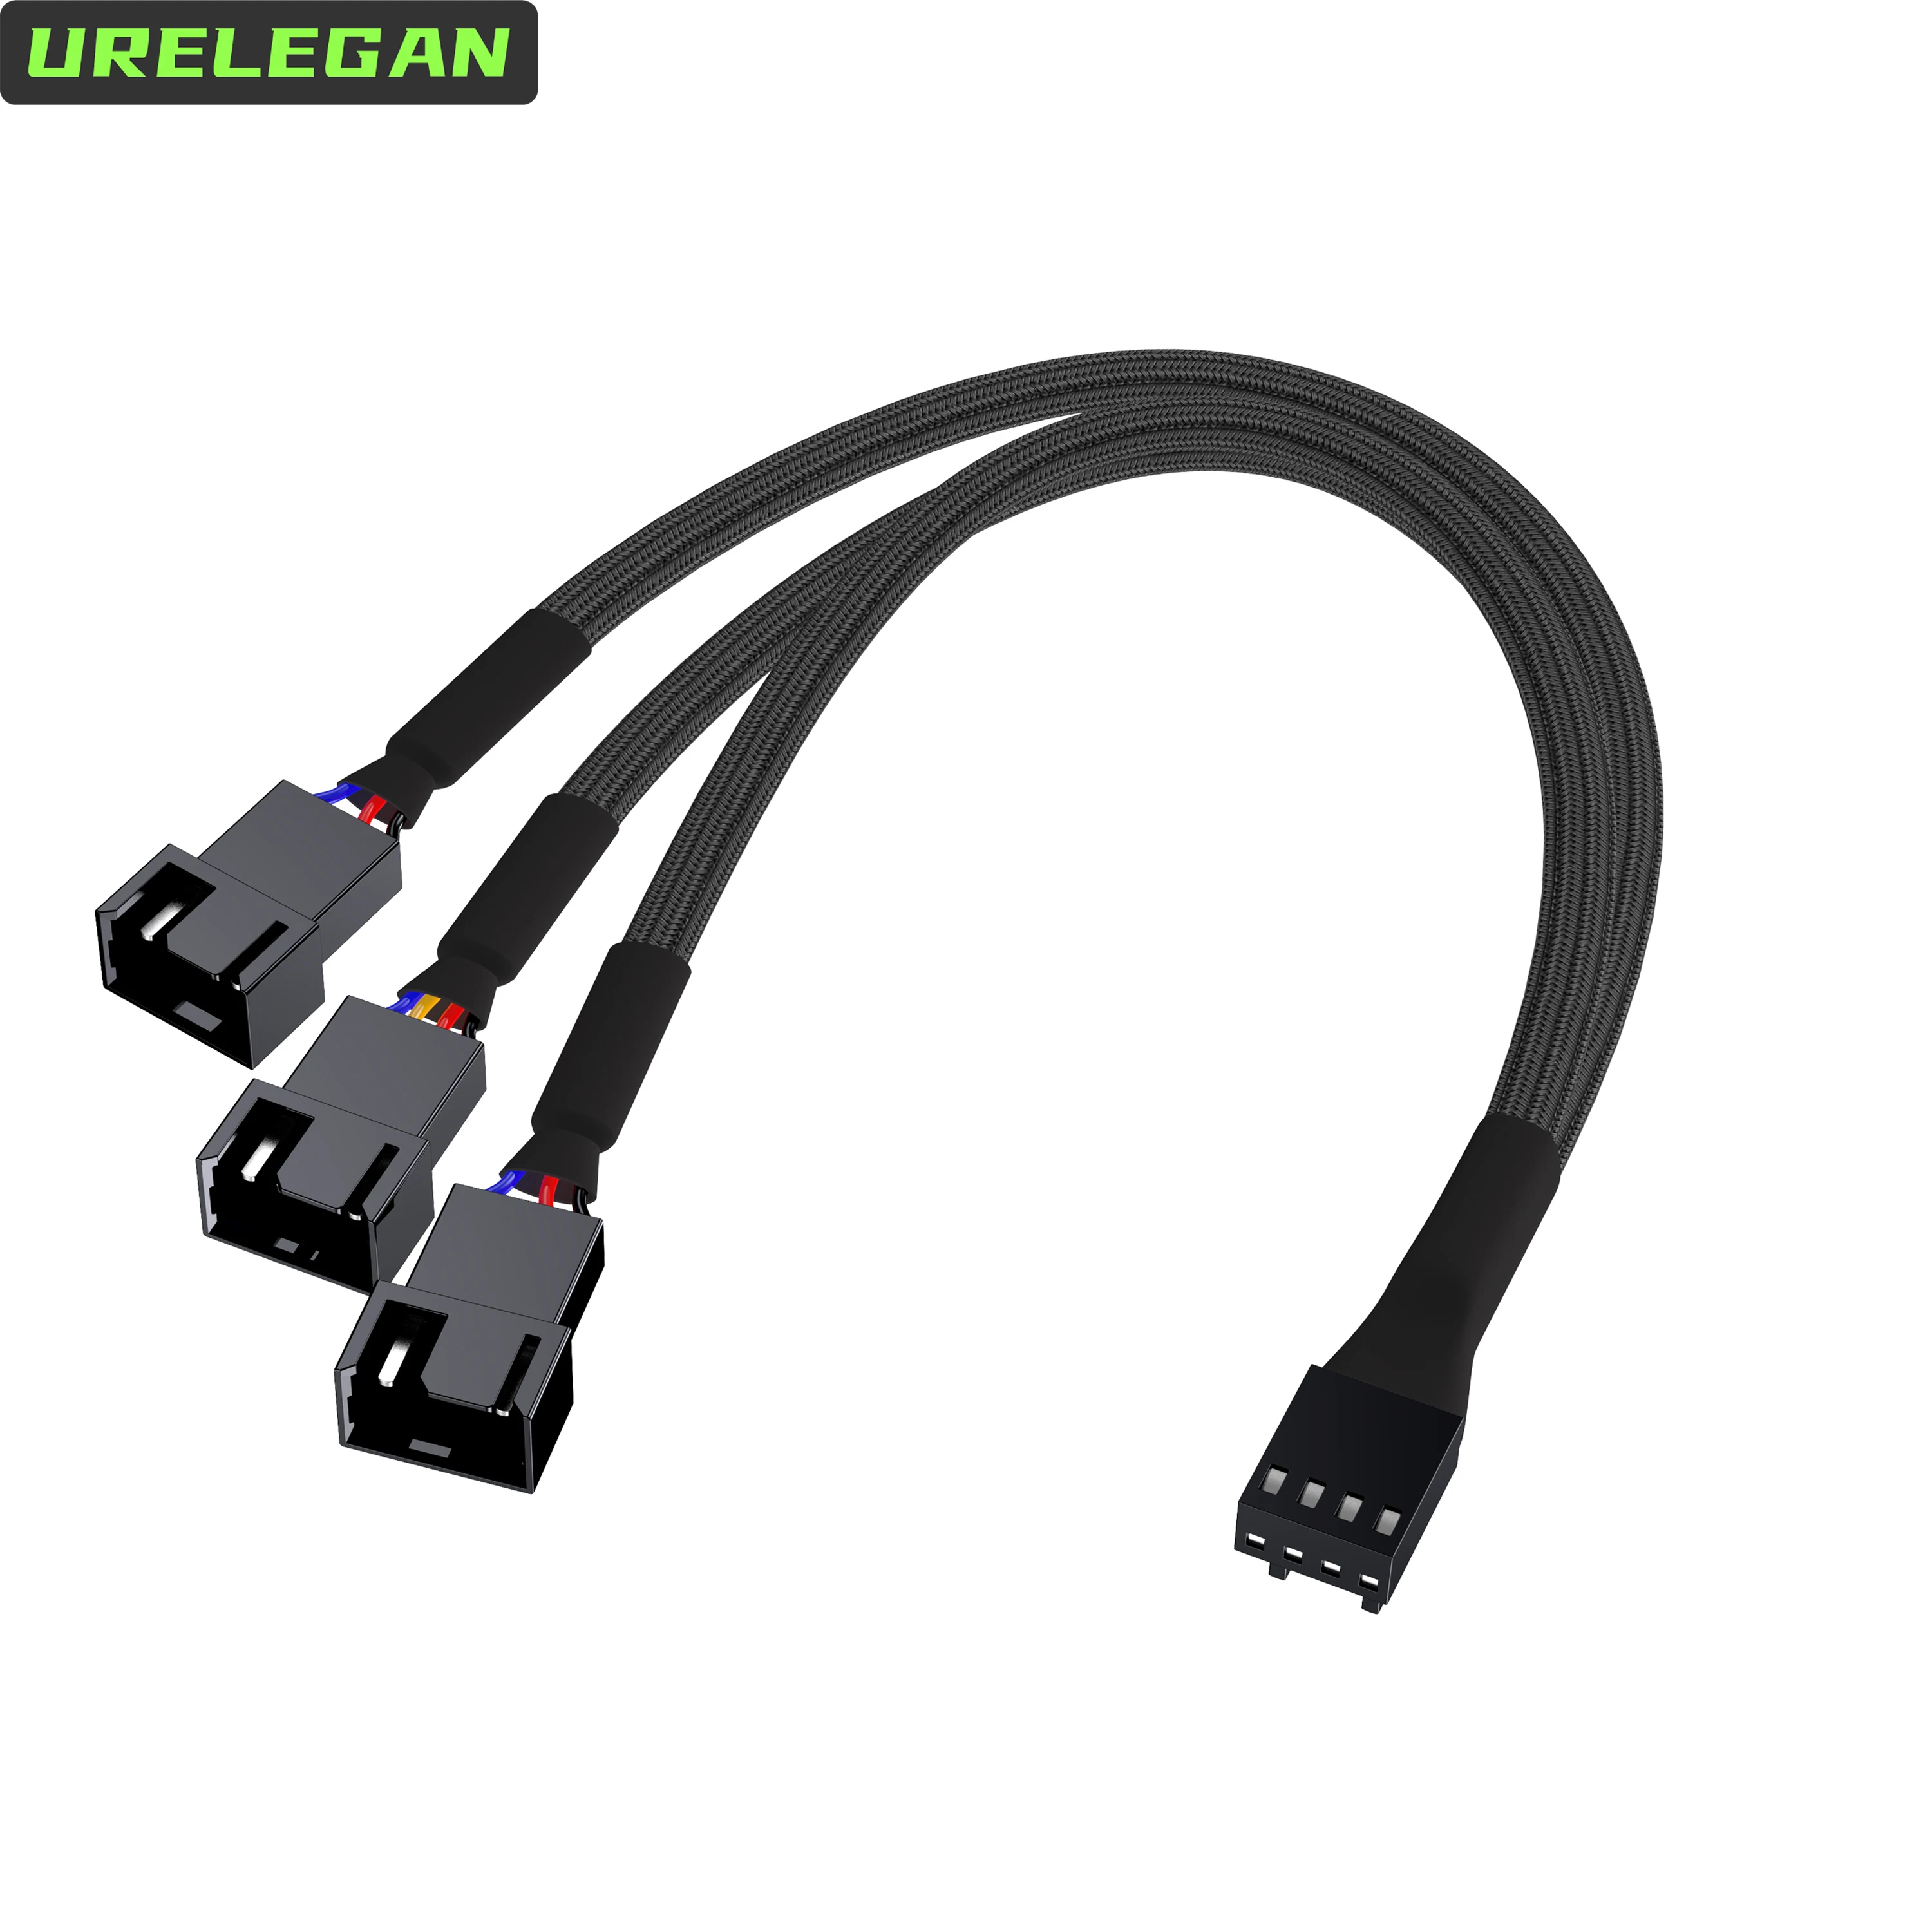 4 Pin Pwm Fan Cable 1 To 3 Ways Computer CPU Fan Splitter Black Sleeved  Extension Power Cable Connector PWM Extension Cables